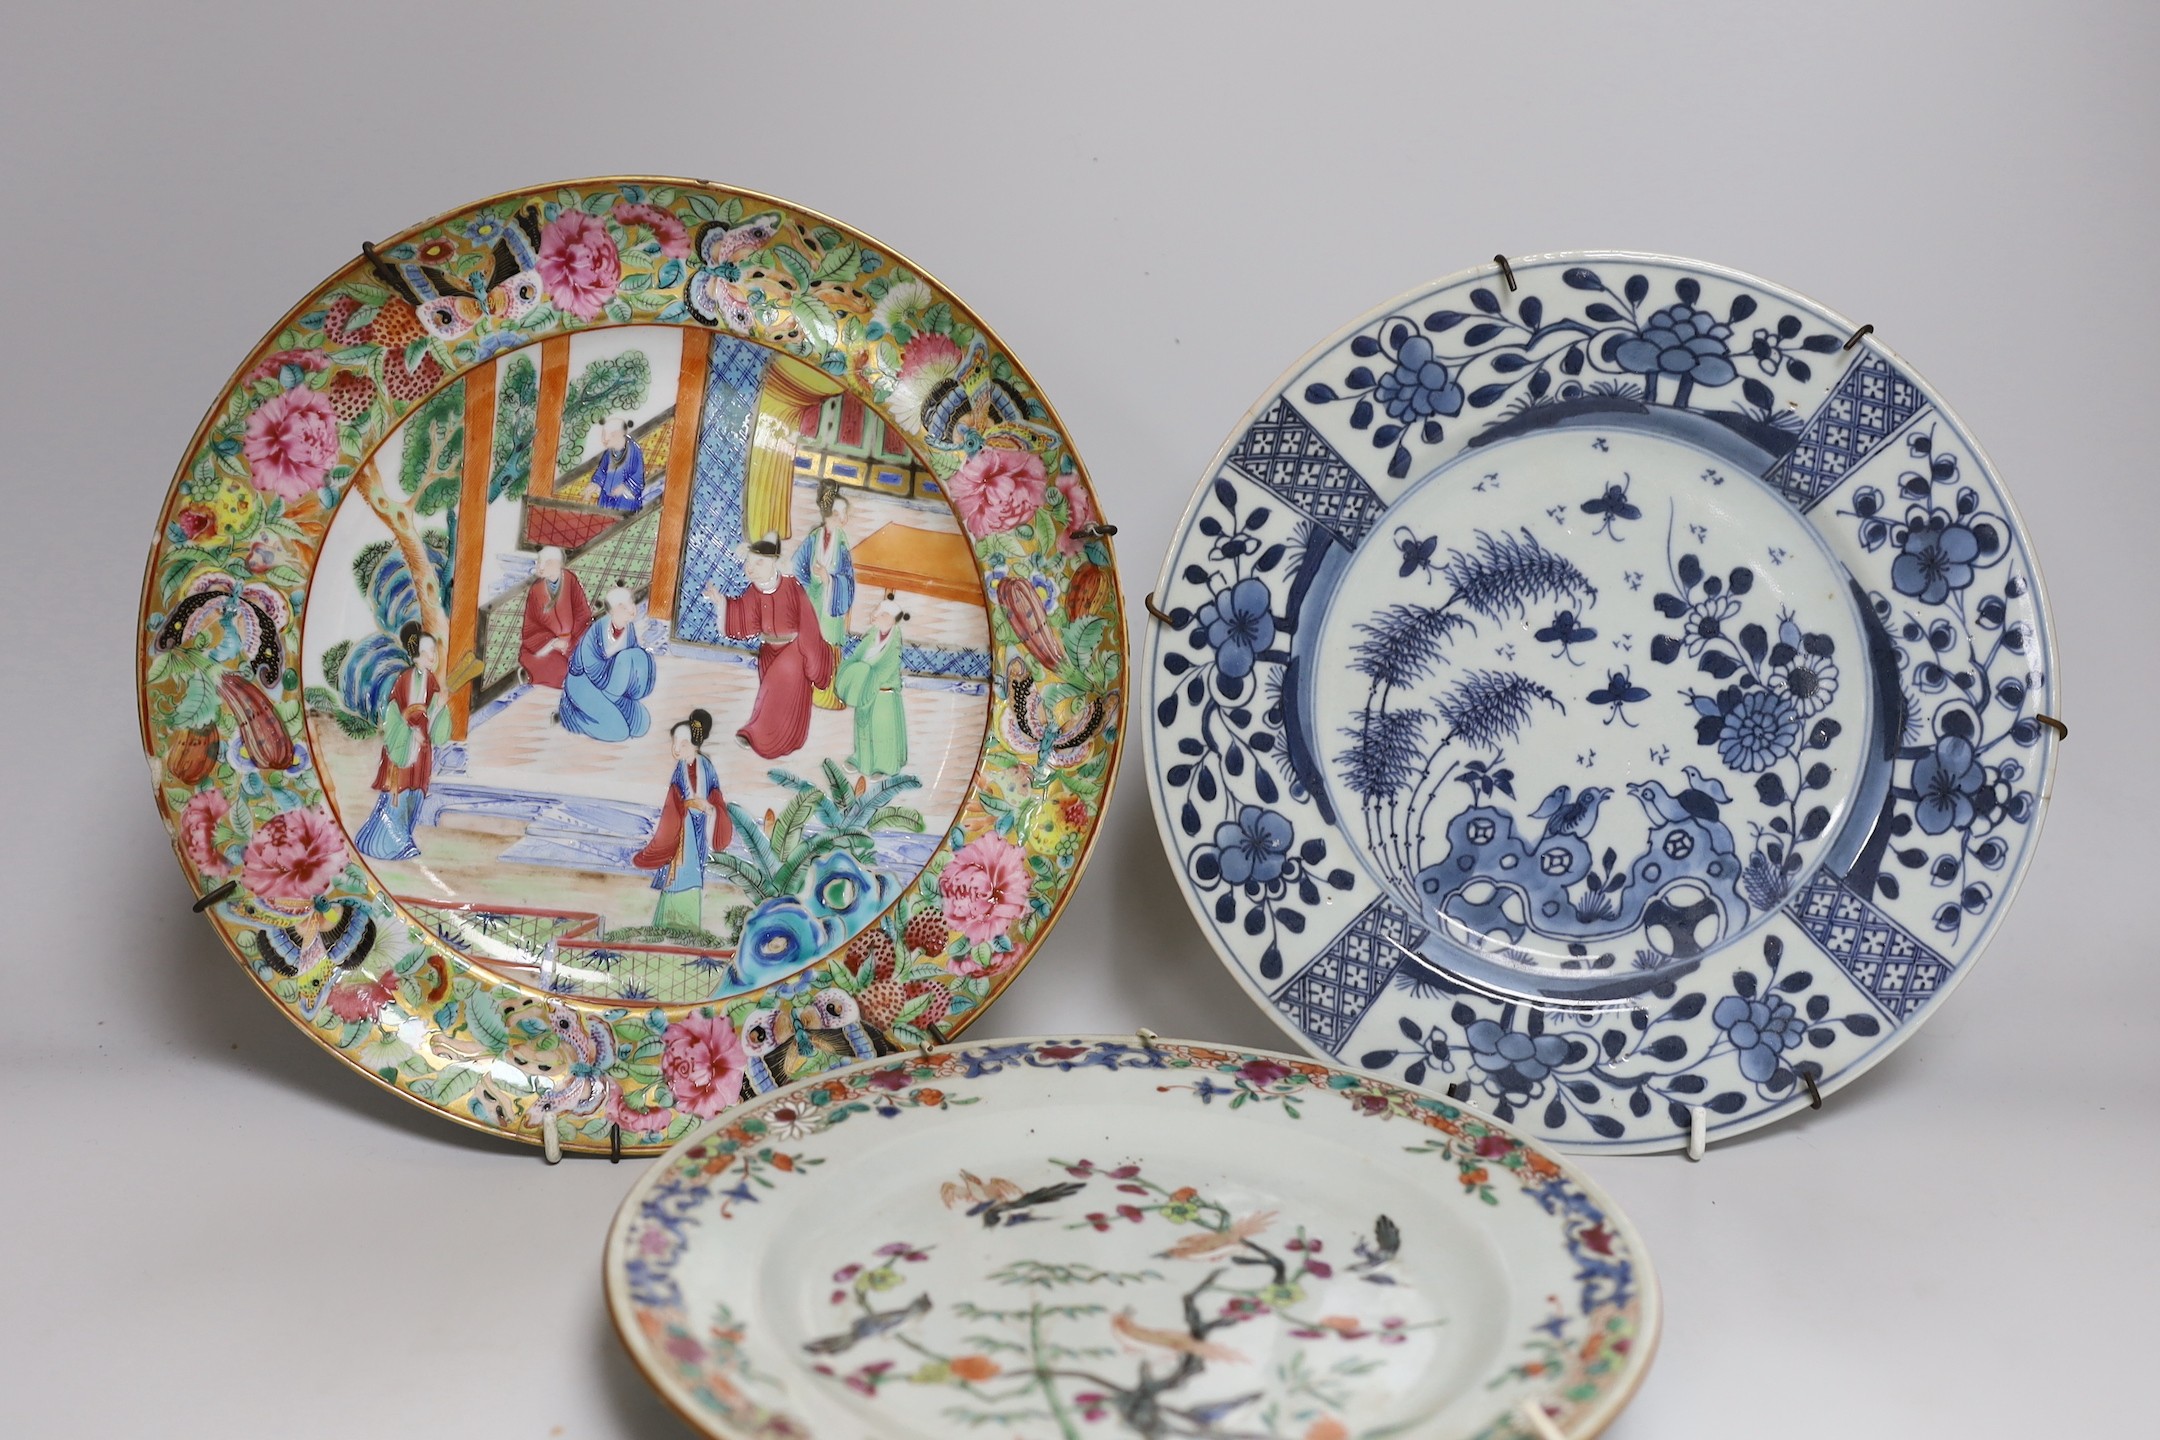 A 19th century Chinese enamelled porcelain dish, 25.4cm and two 18th century Chinese exports porcelain plates (3)